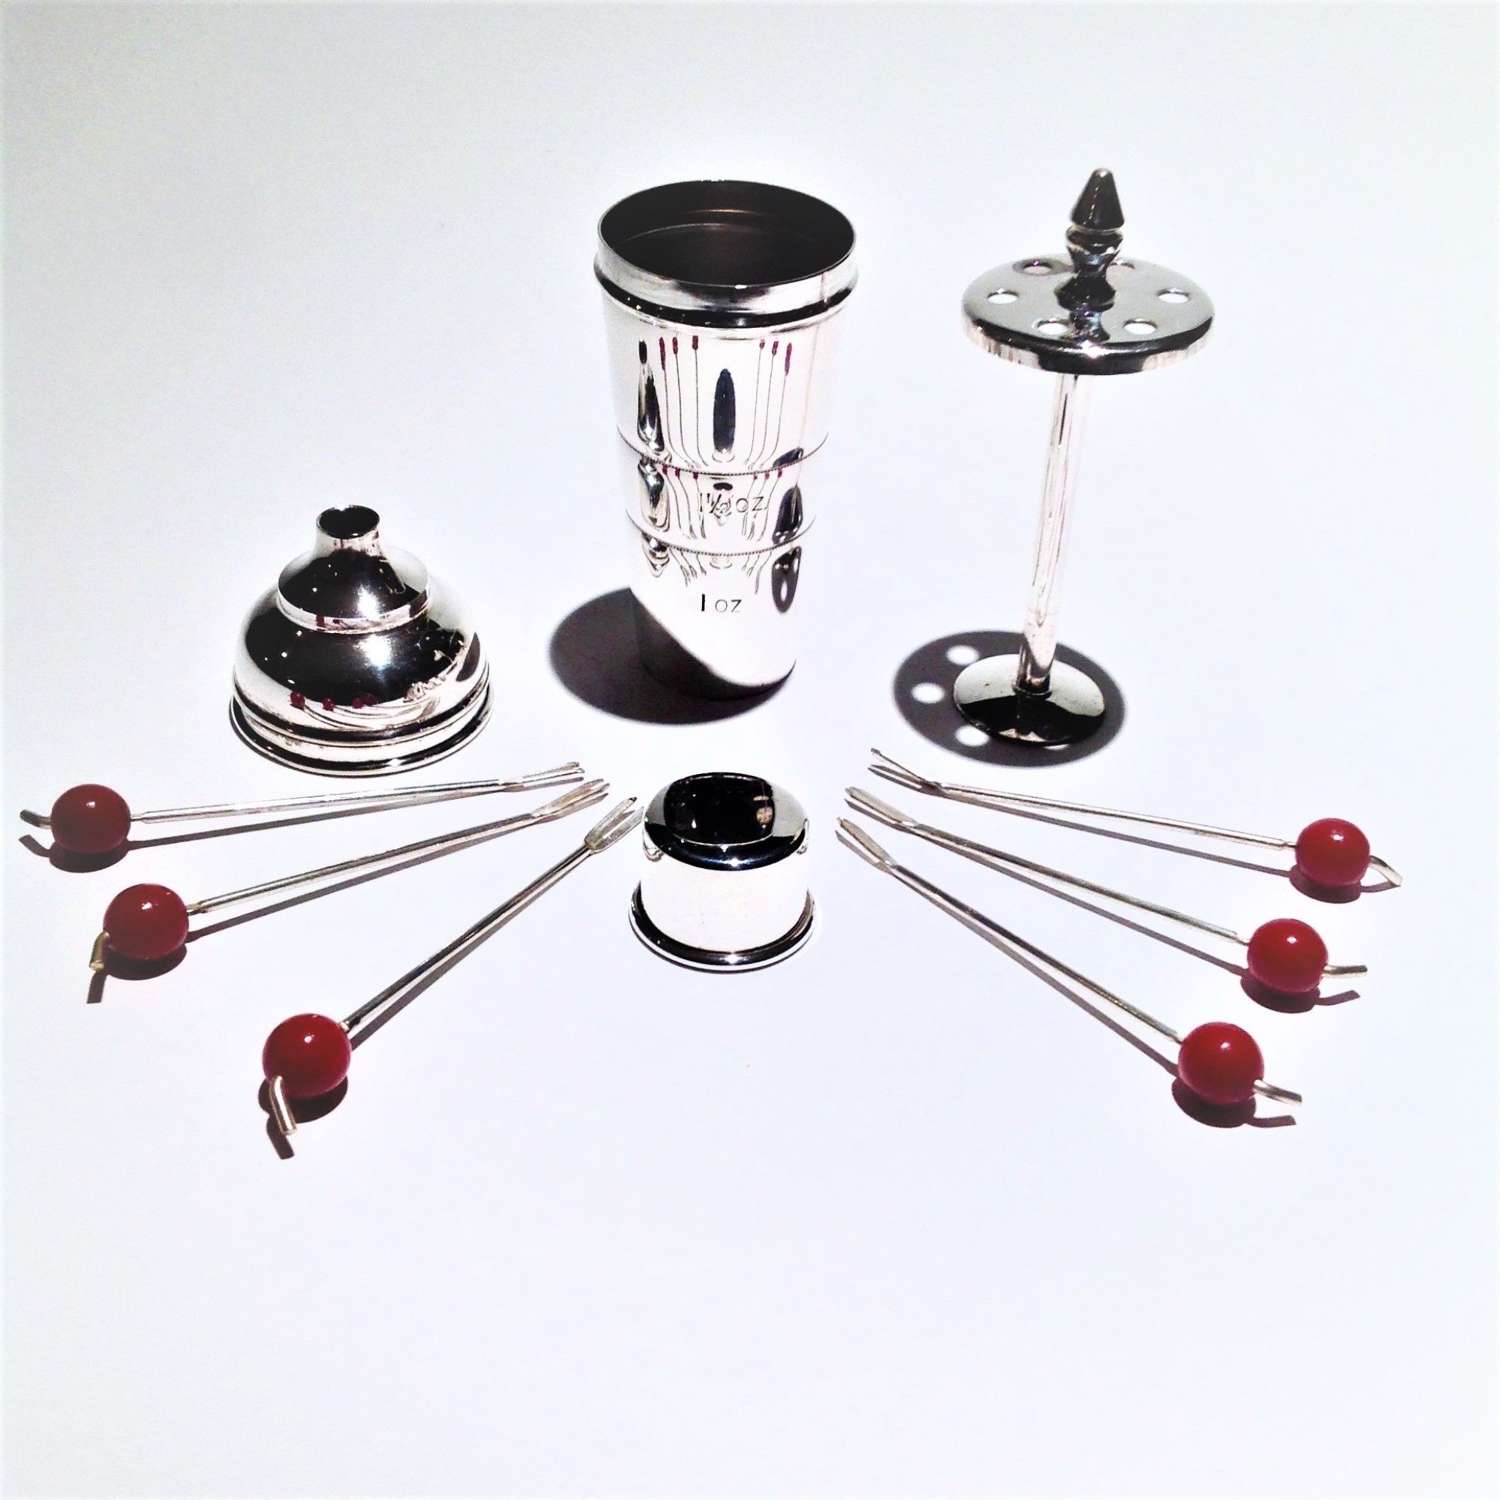 Silver-plated miniature cocktail shaker shape measure containing picks